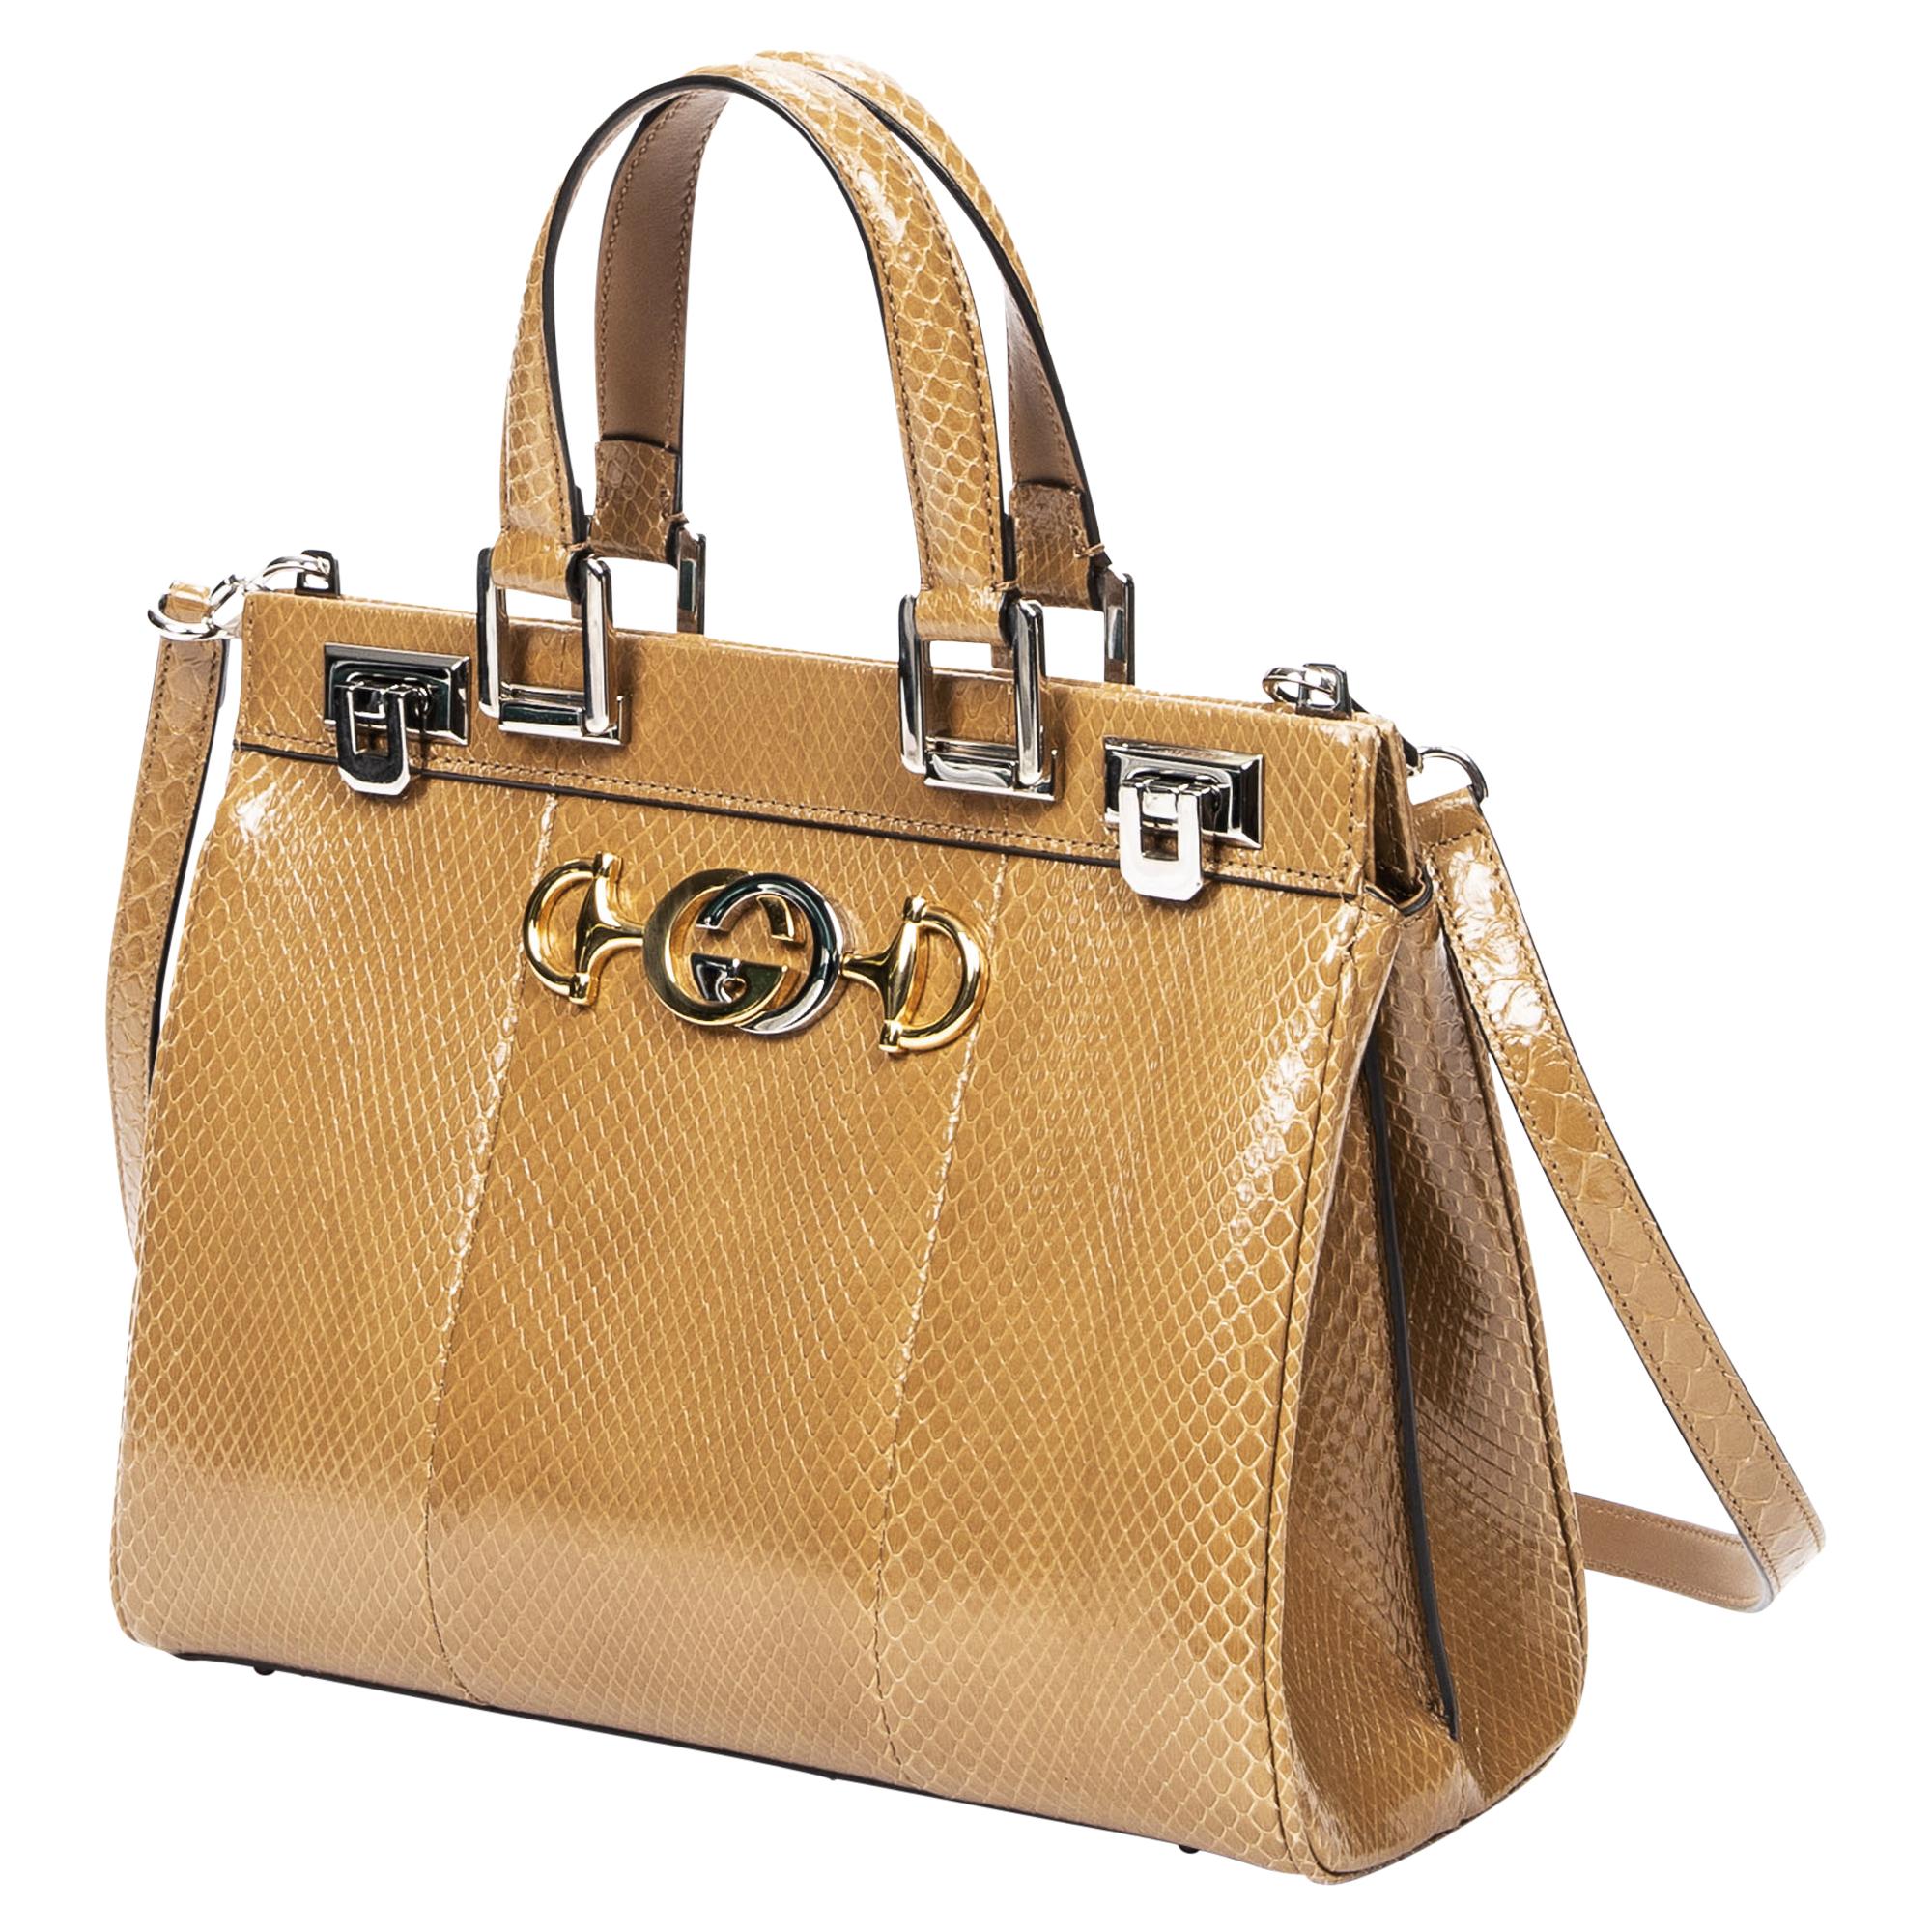 Embrace exotic elegance with the Gucci Beige Snakeskin Small Top Handle Bag. Crafted from luxurious brown snakeskin leather in a versatile beige hue, it's a statement piece for the modern fashionista. Adorned with silver hardware and featuring